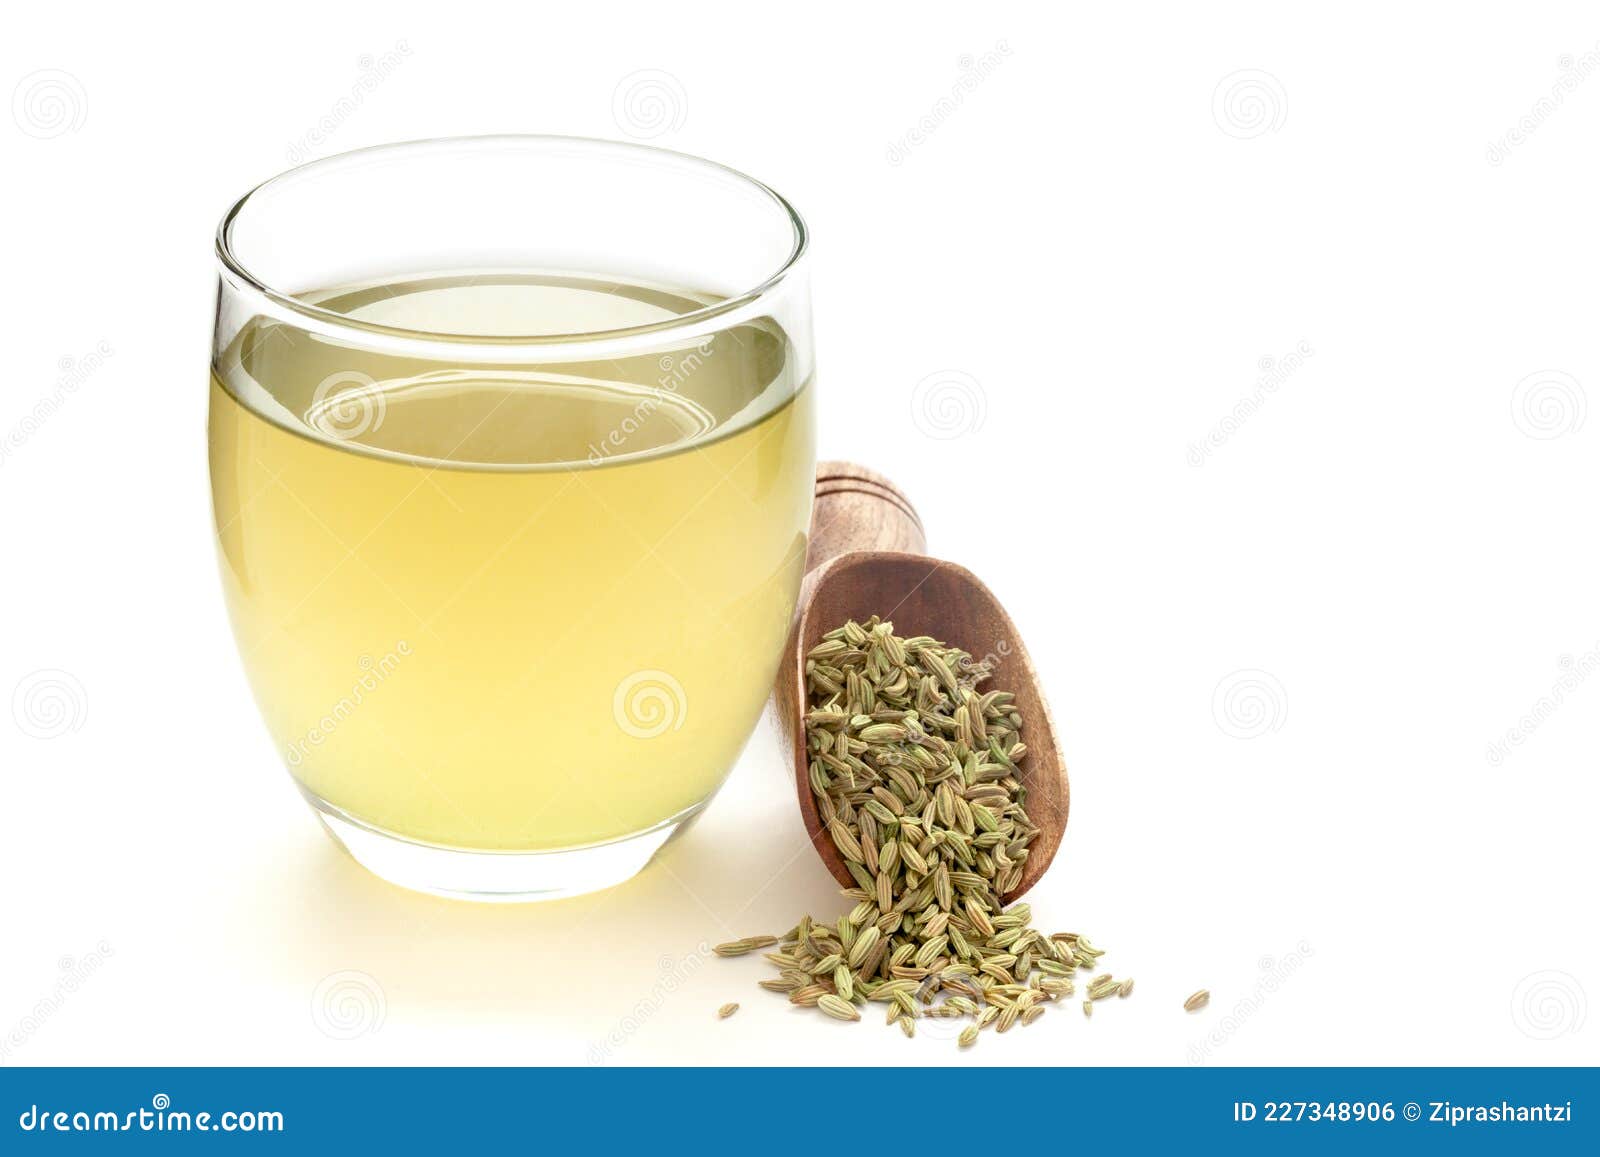 close-up of original  organic boiled water tea or kada  with sonf  or fennel seed  foeniculum vulgare  in a transparent glass